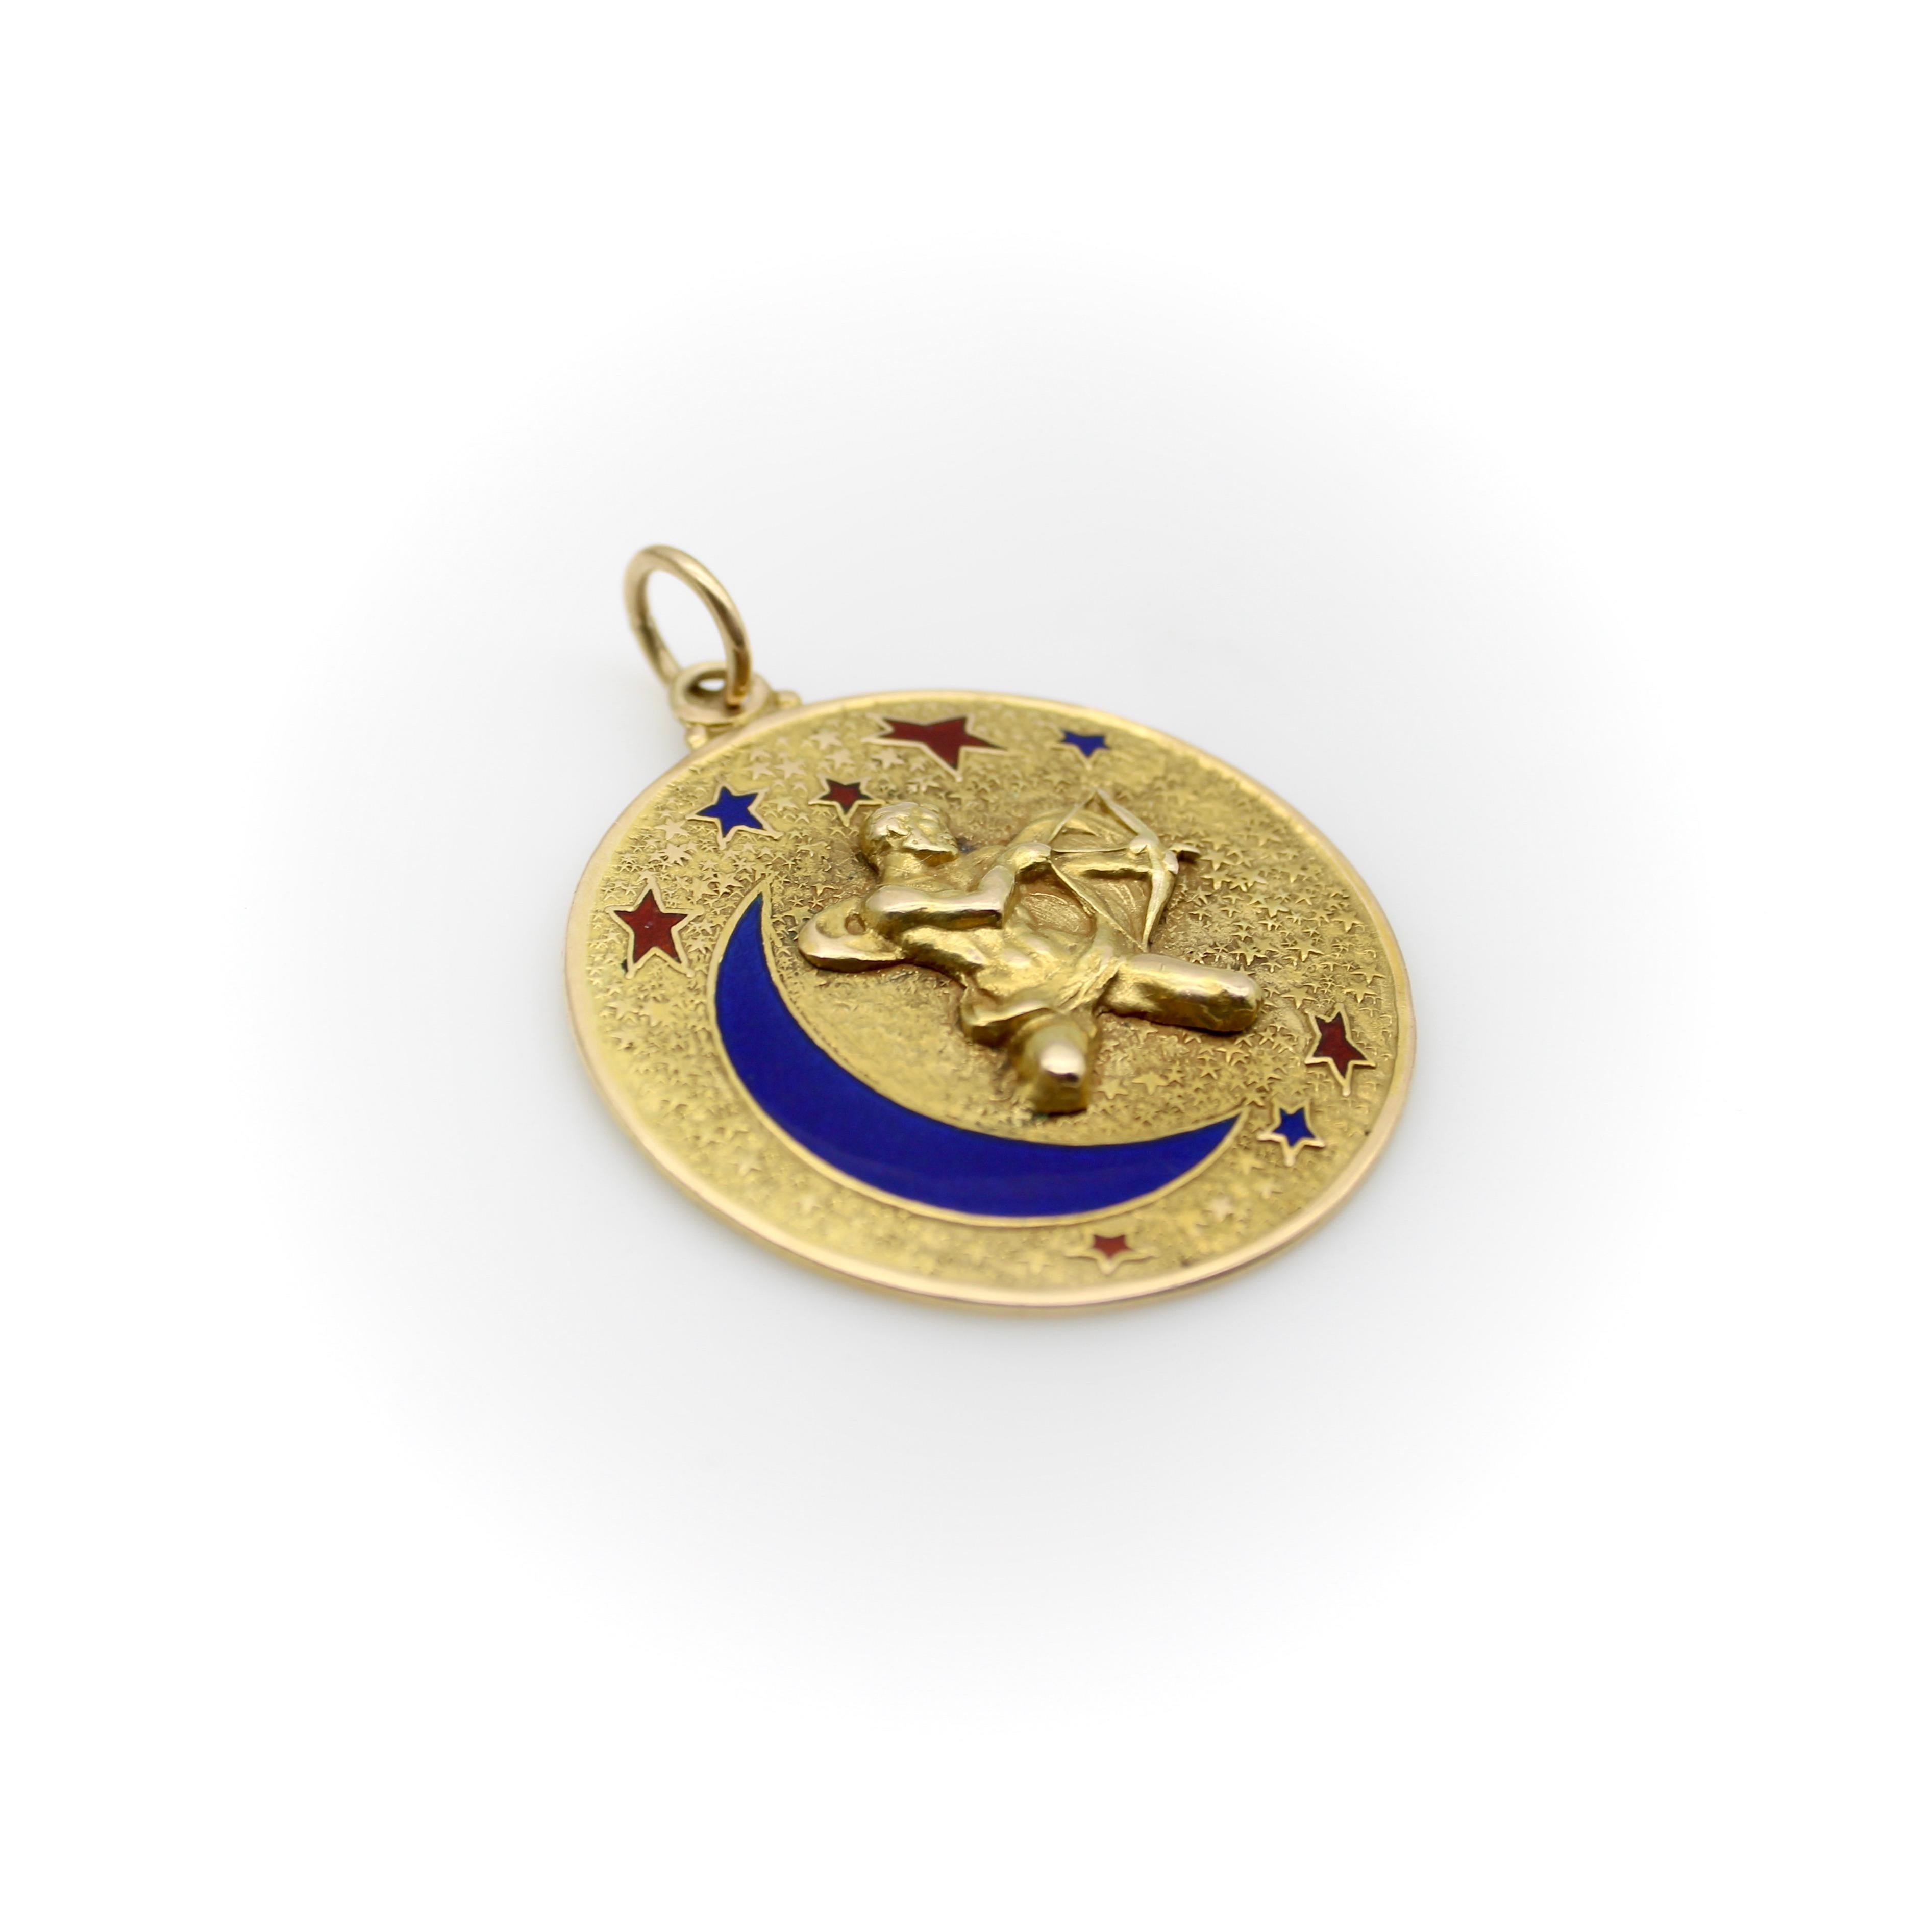 This large 14k gold medallion pendant is beautifully sculpted with the image of Sagittarius the archer amid a background of stars. In the image, Sagittarius is muscular and godlike; he pulls back the bow and arrow with flexed biceps. The buildup of